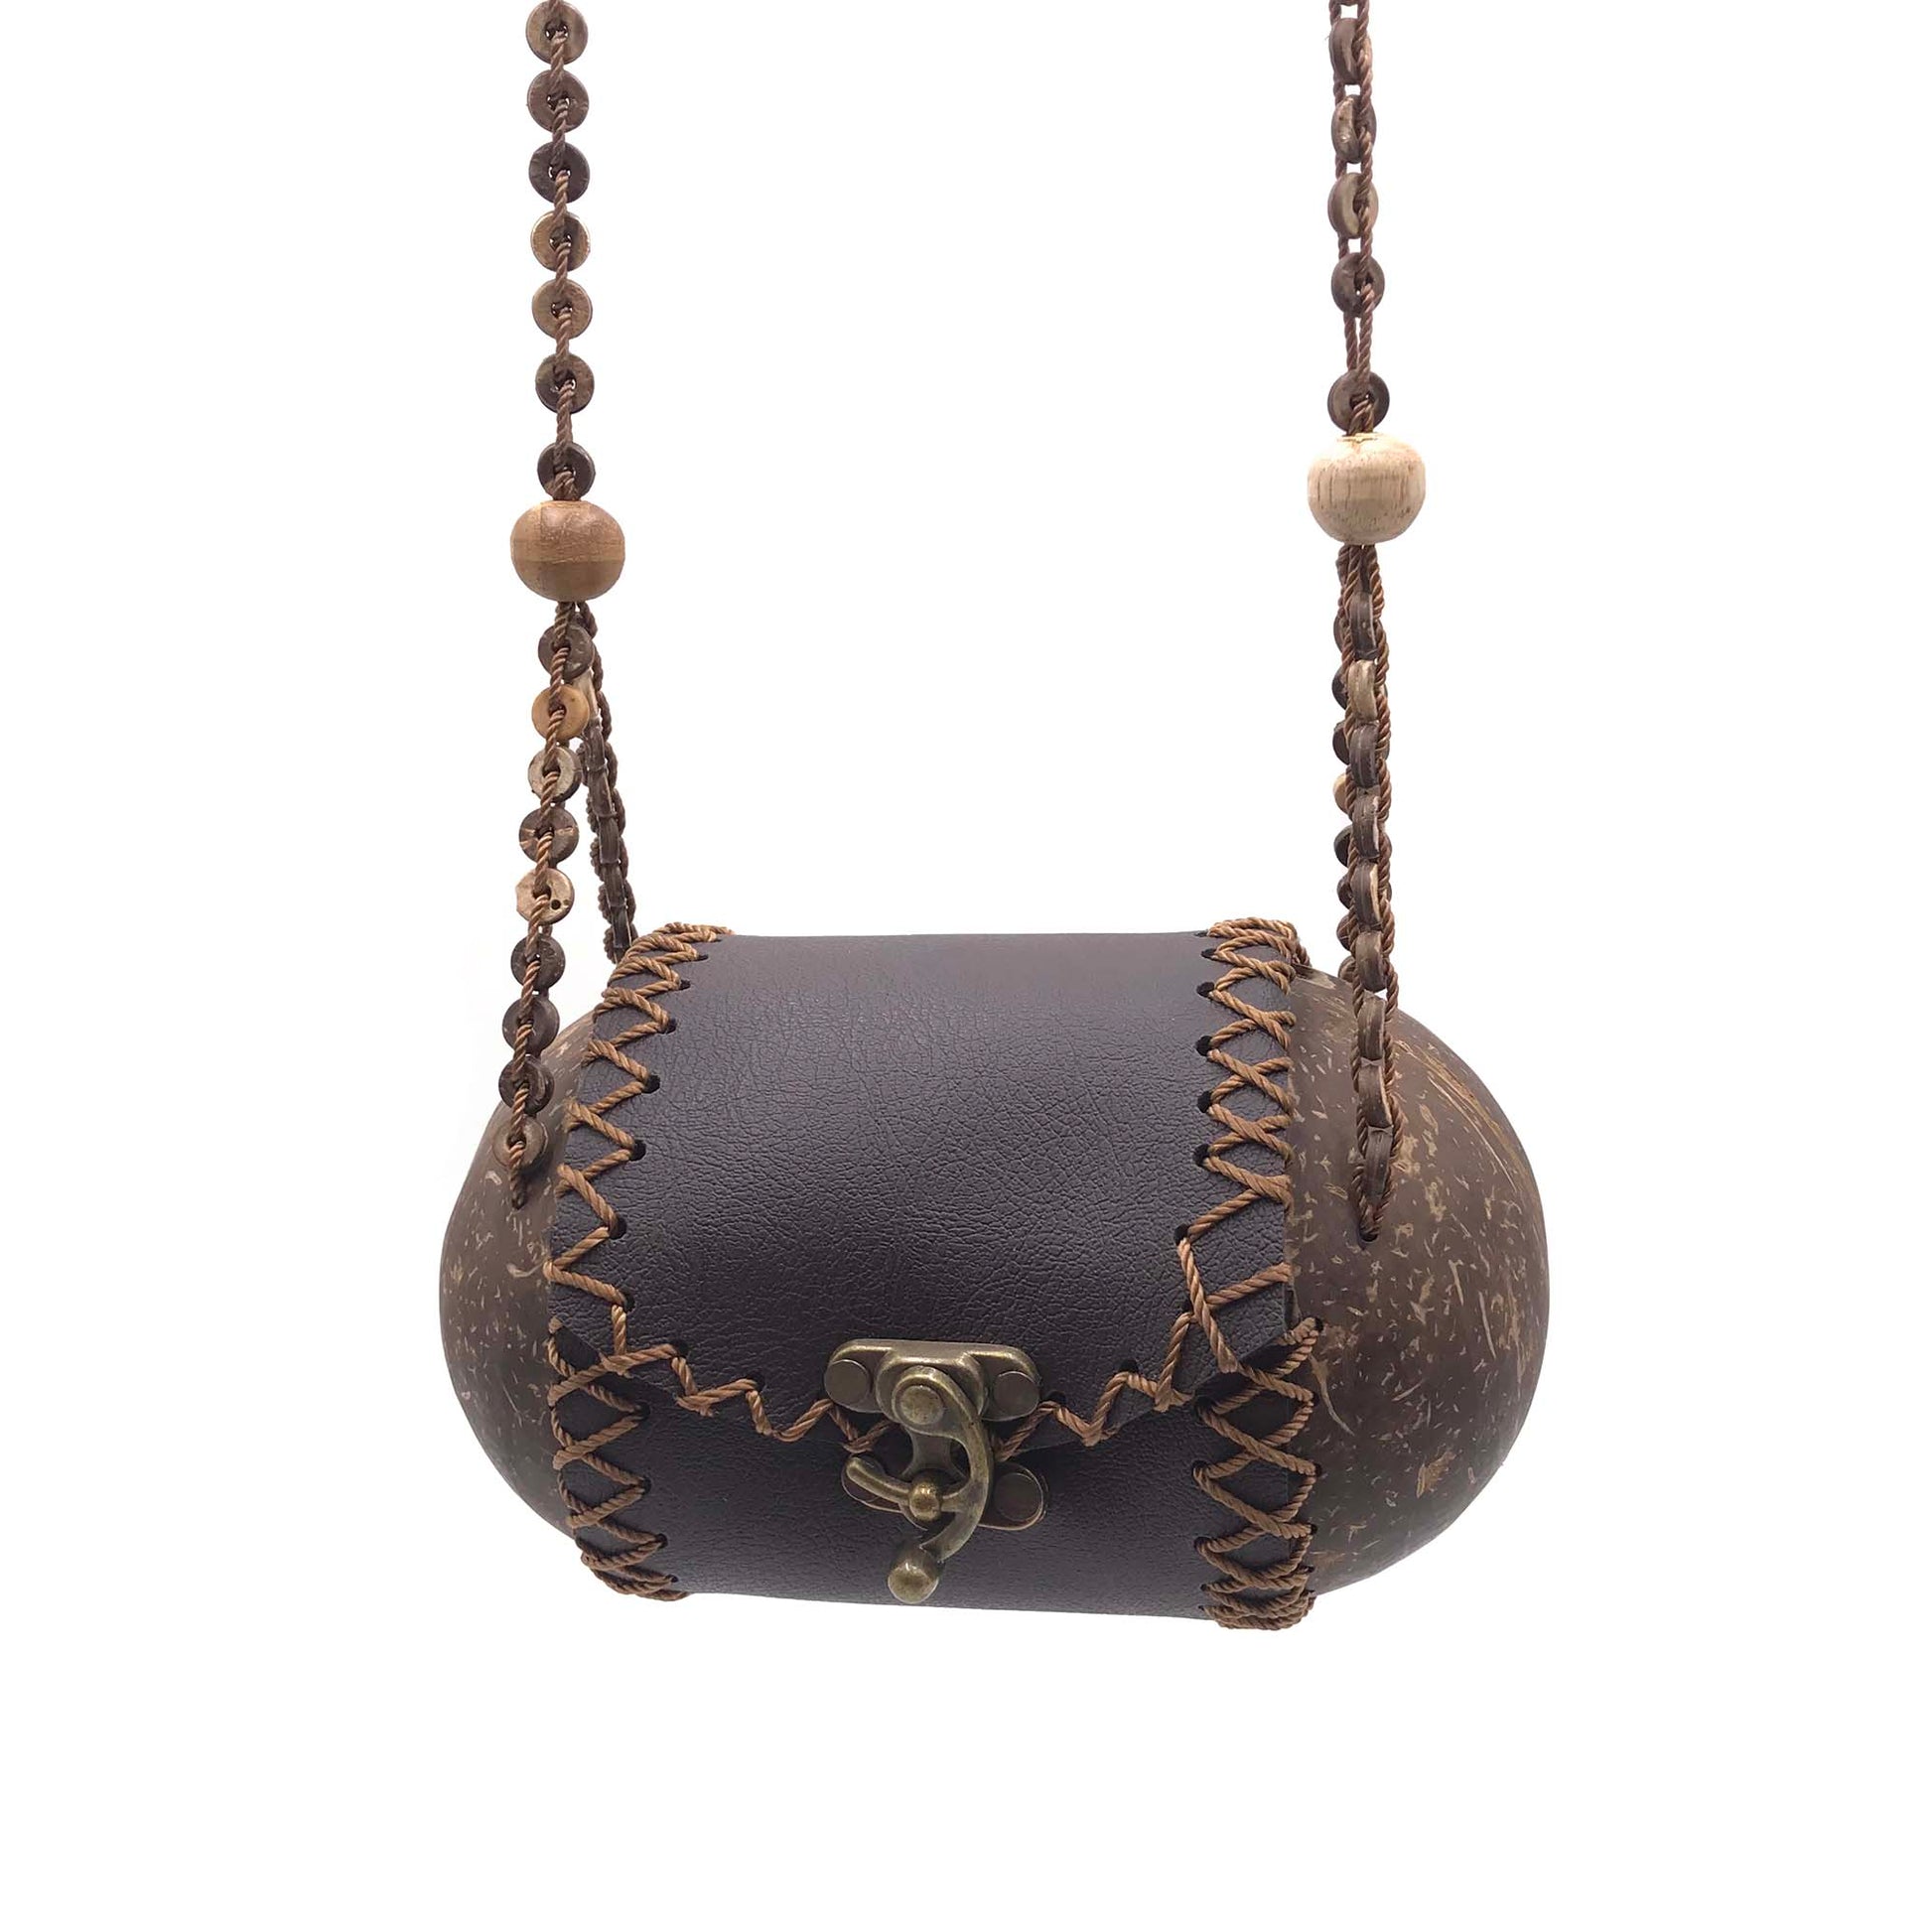 String Bag hand-crafted from coconut shells